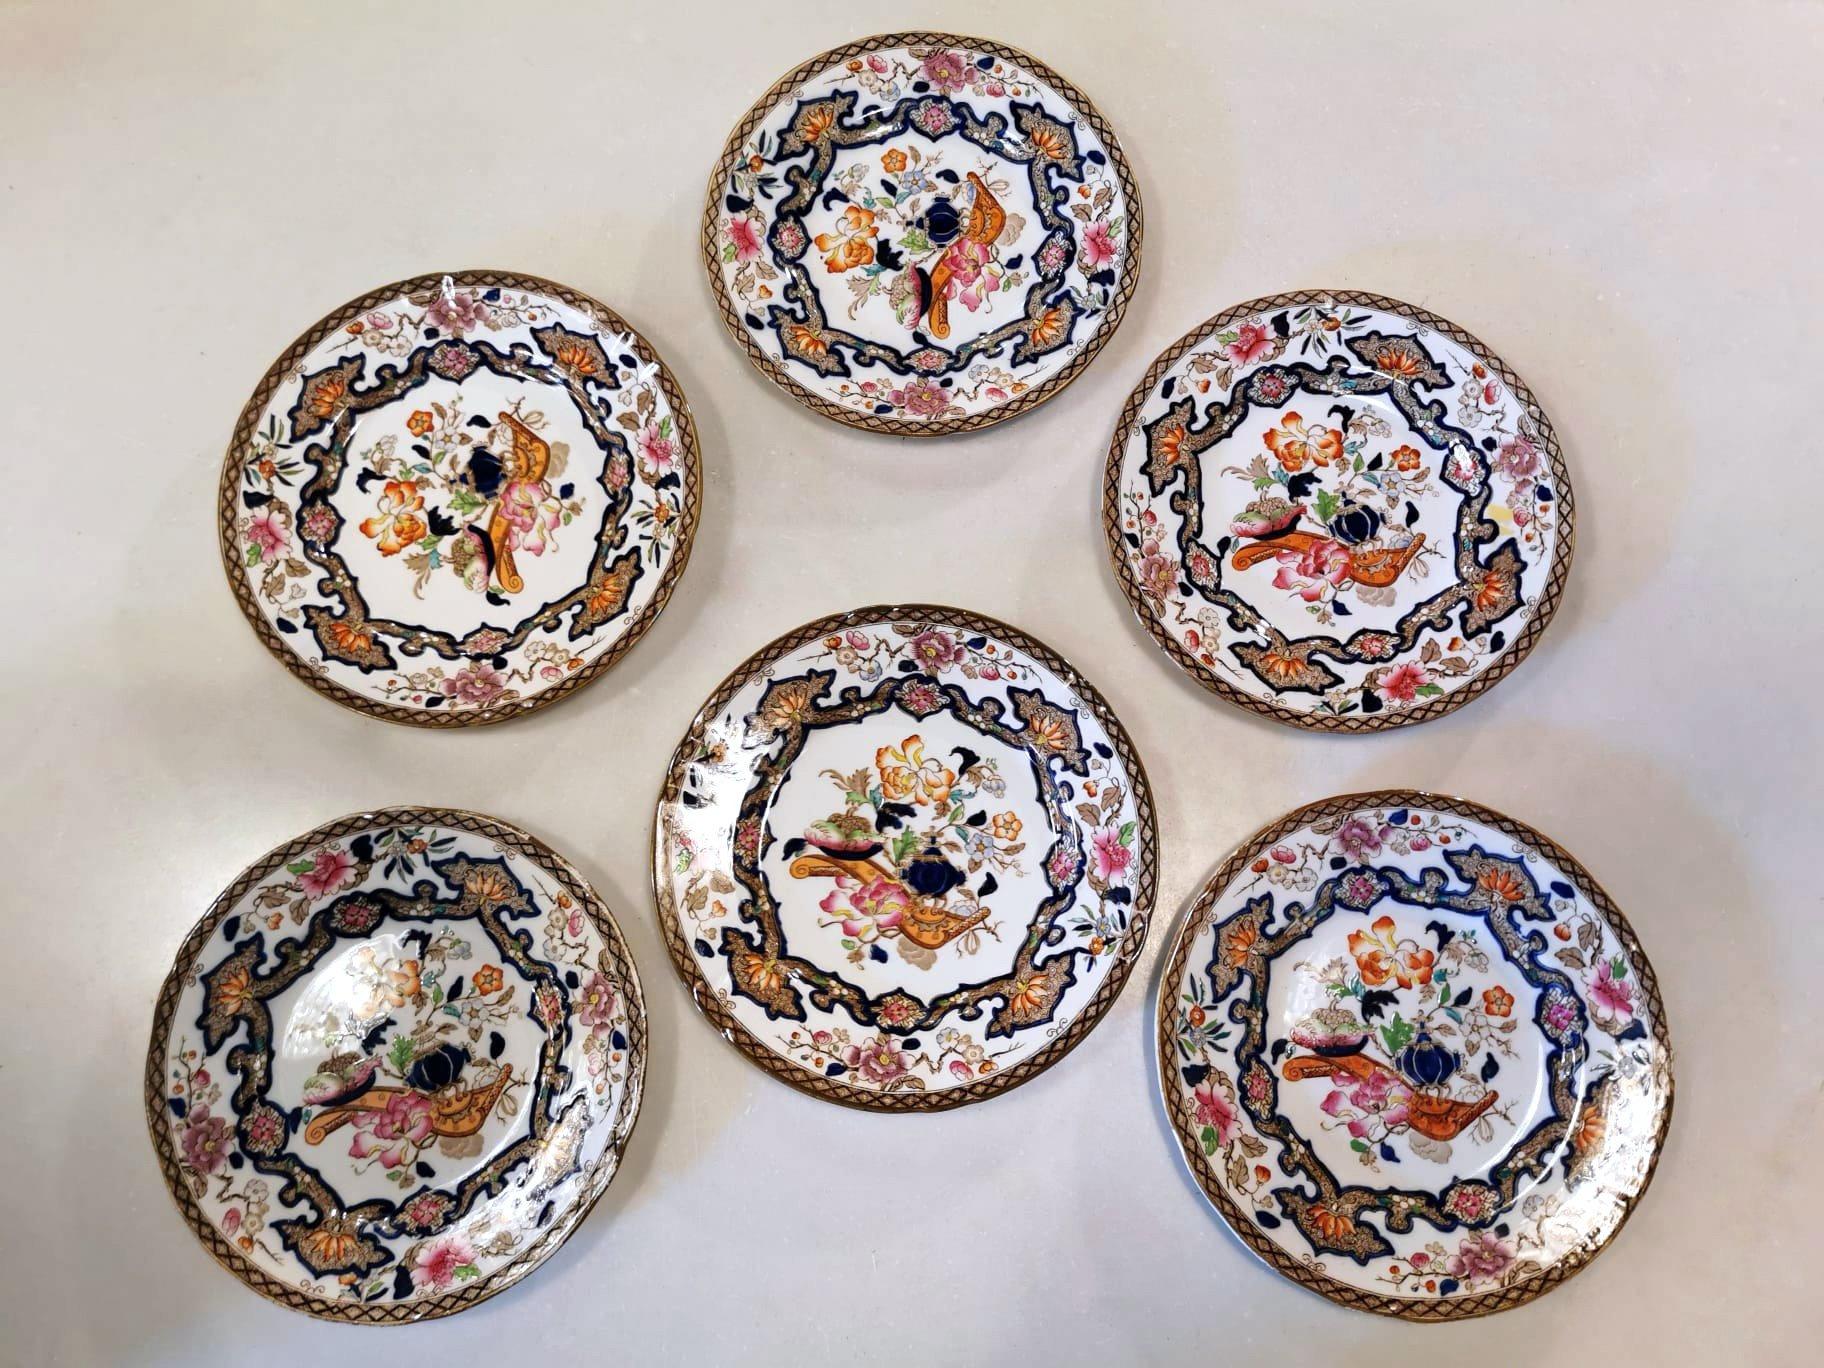 We kindly suggest you read the whole description, because with it we try to give you detailed technical and historical information to guarantee the authenticity of our objects.
Six amazing English porcelain saucers, once probably belonged to a large